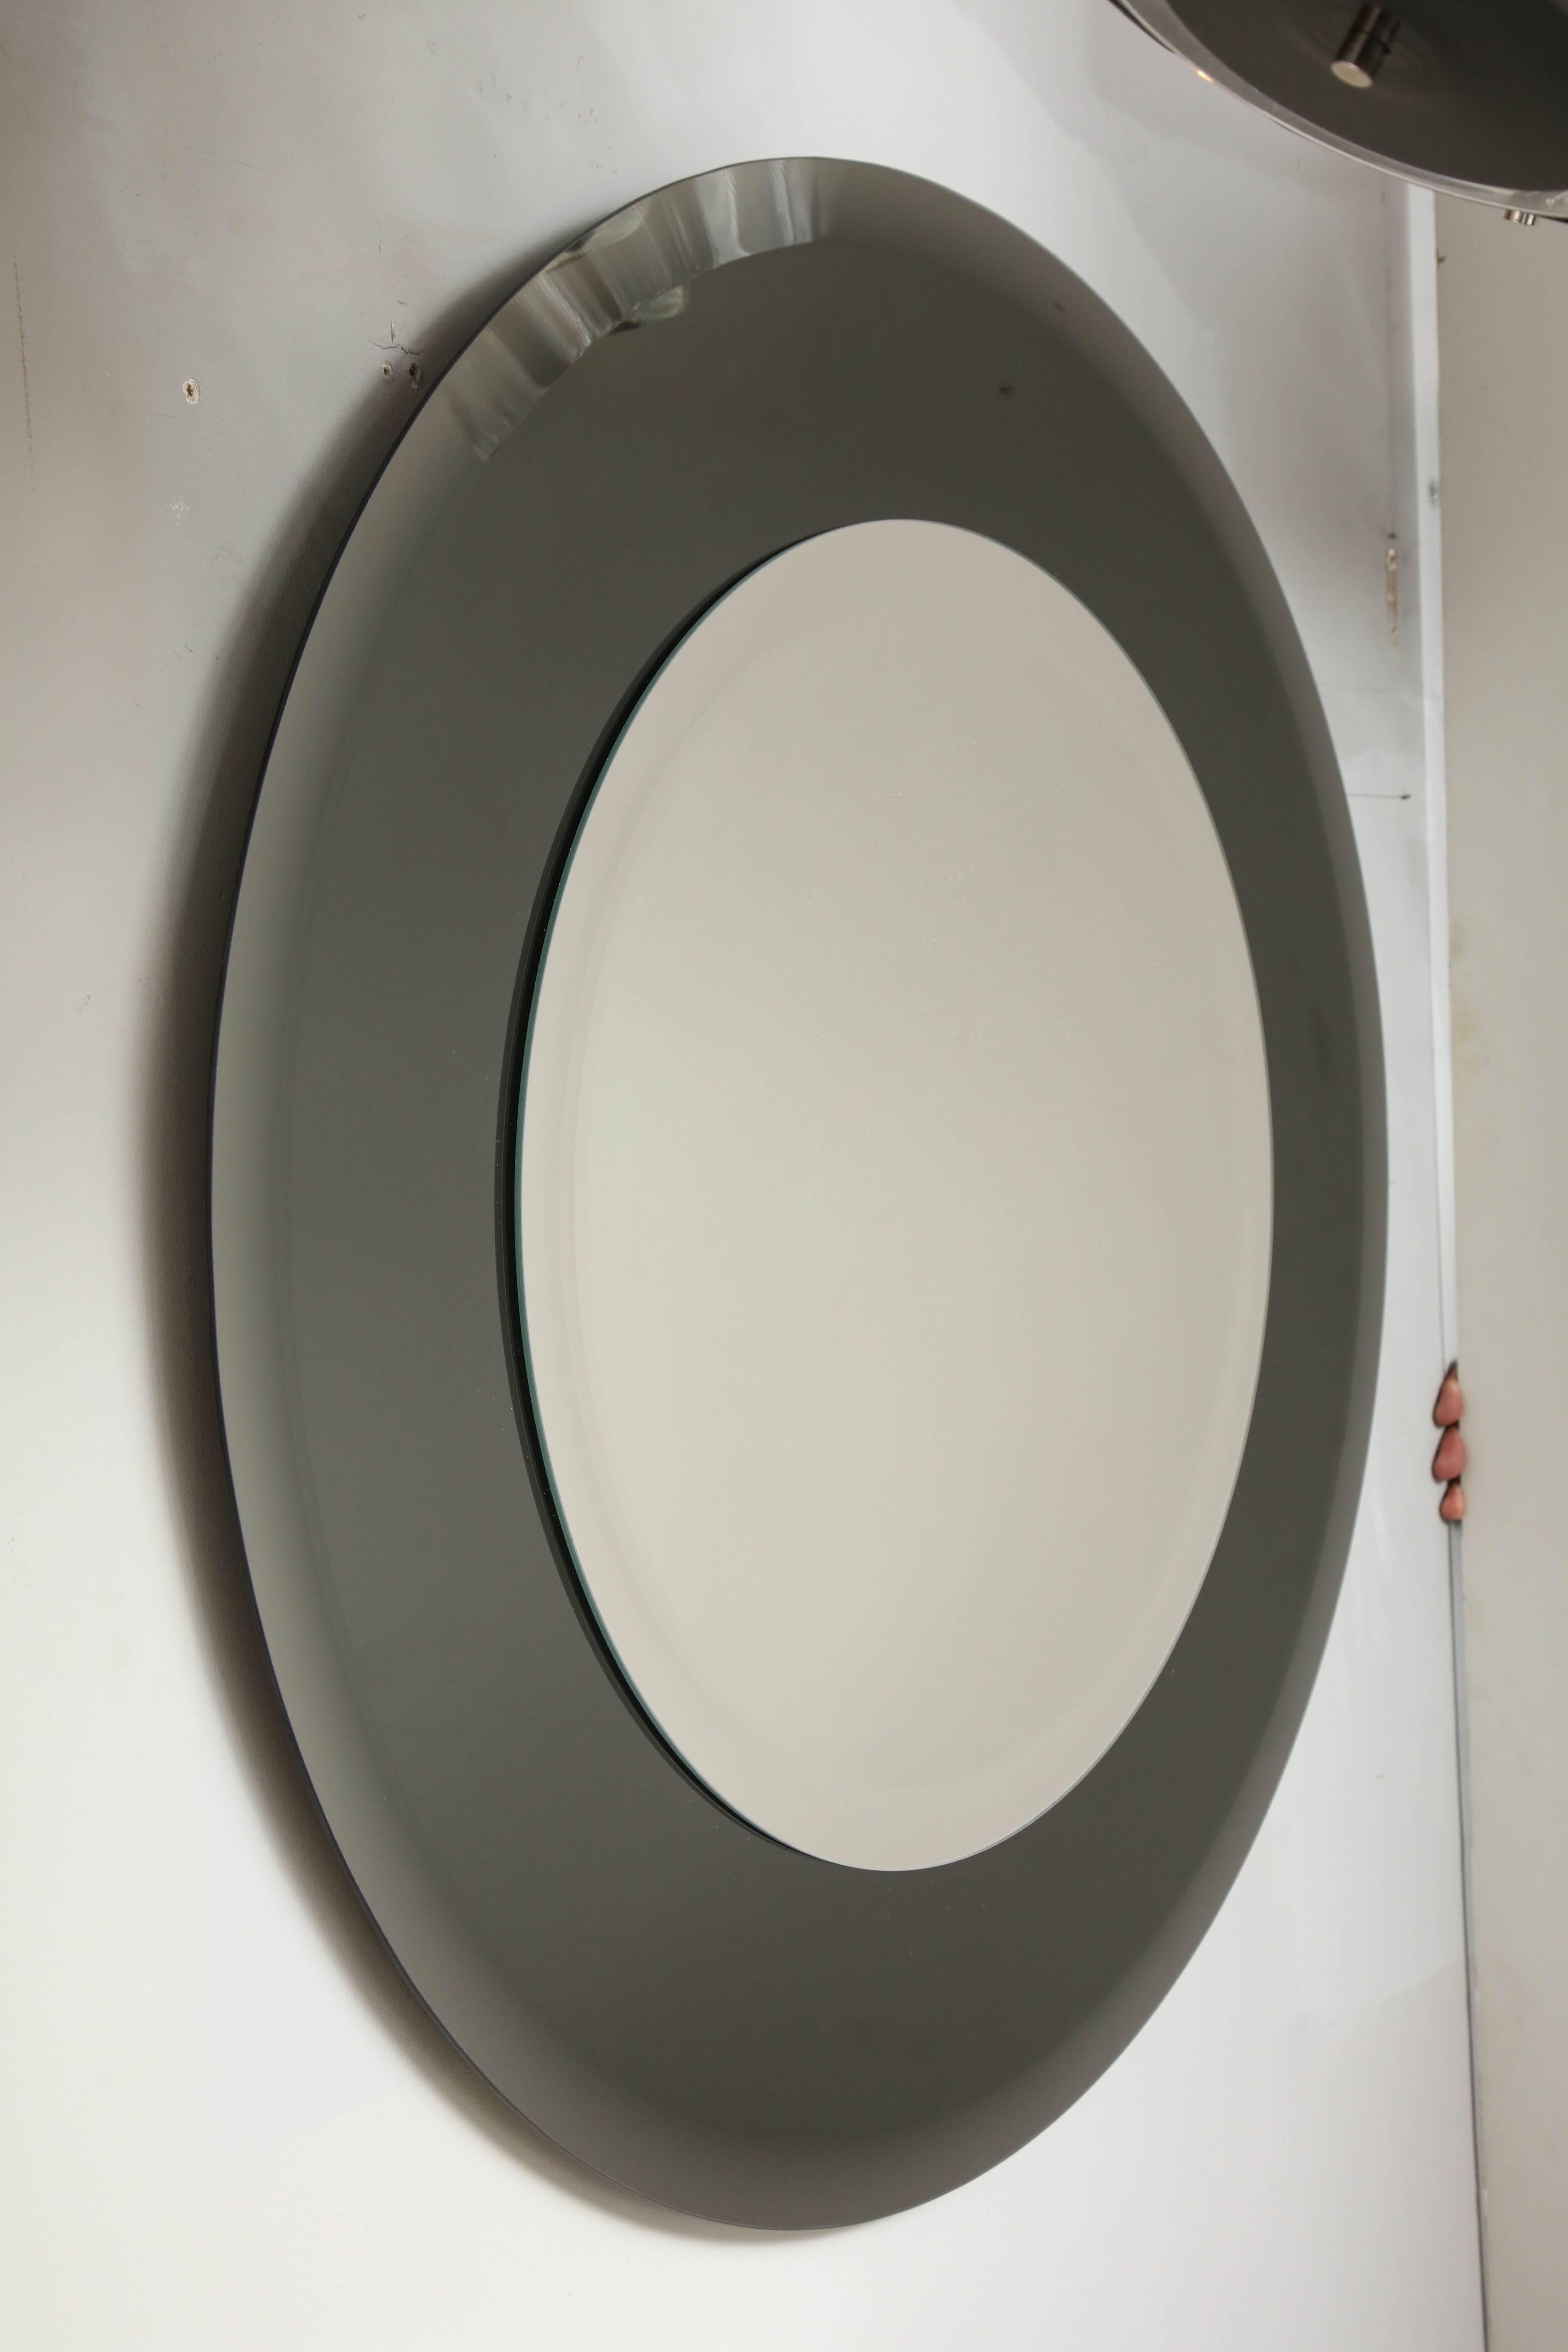 Custom beveled edge round mirror with smoke glass border. The mirror in the center is 22